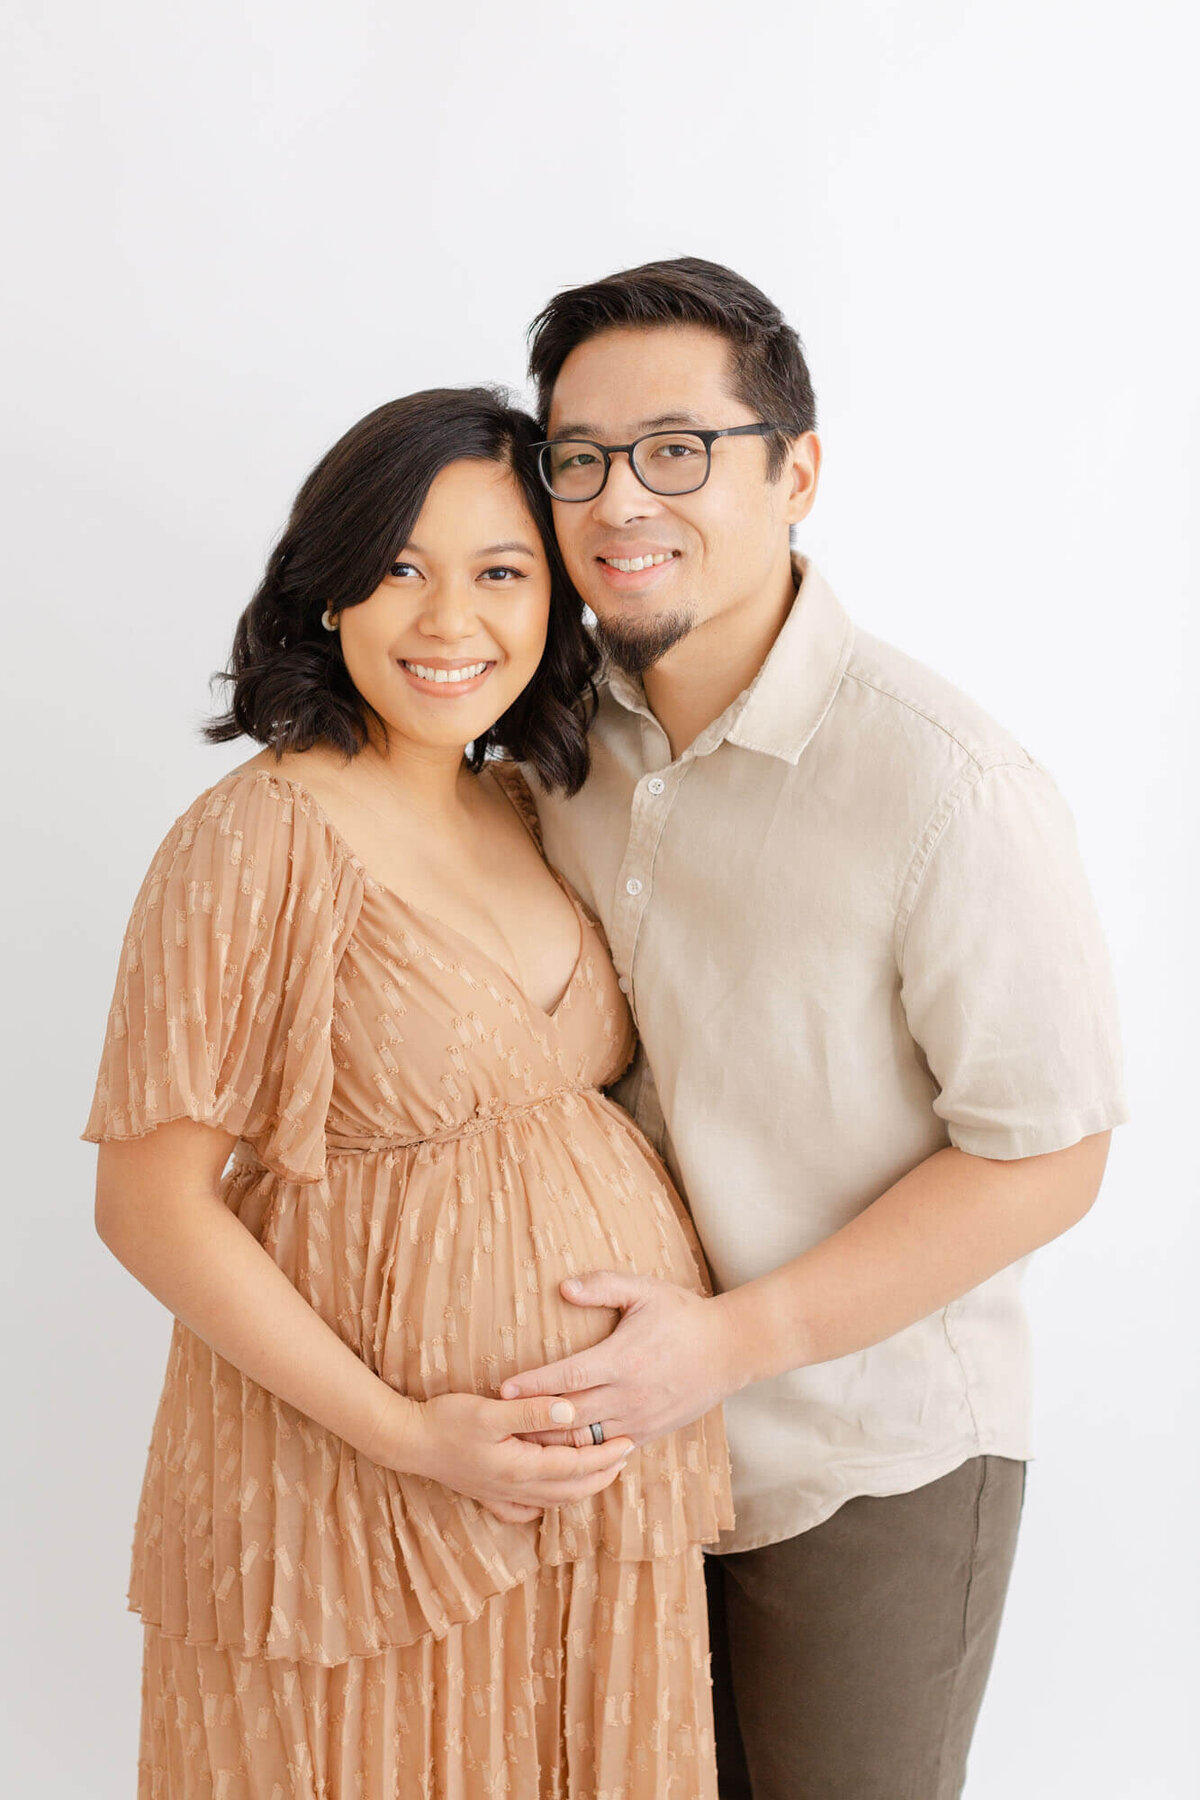 Mama in a taupe dress and standing next to husband who is in neutral clothes. They have their faces touching and are both smiling at the camera while holding Mama's baby belly.